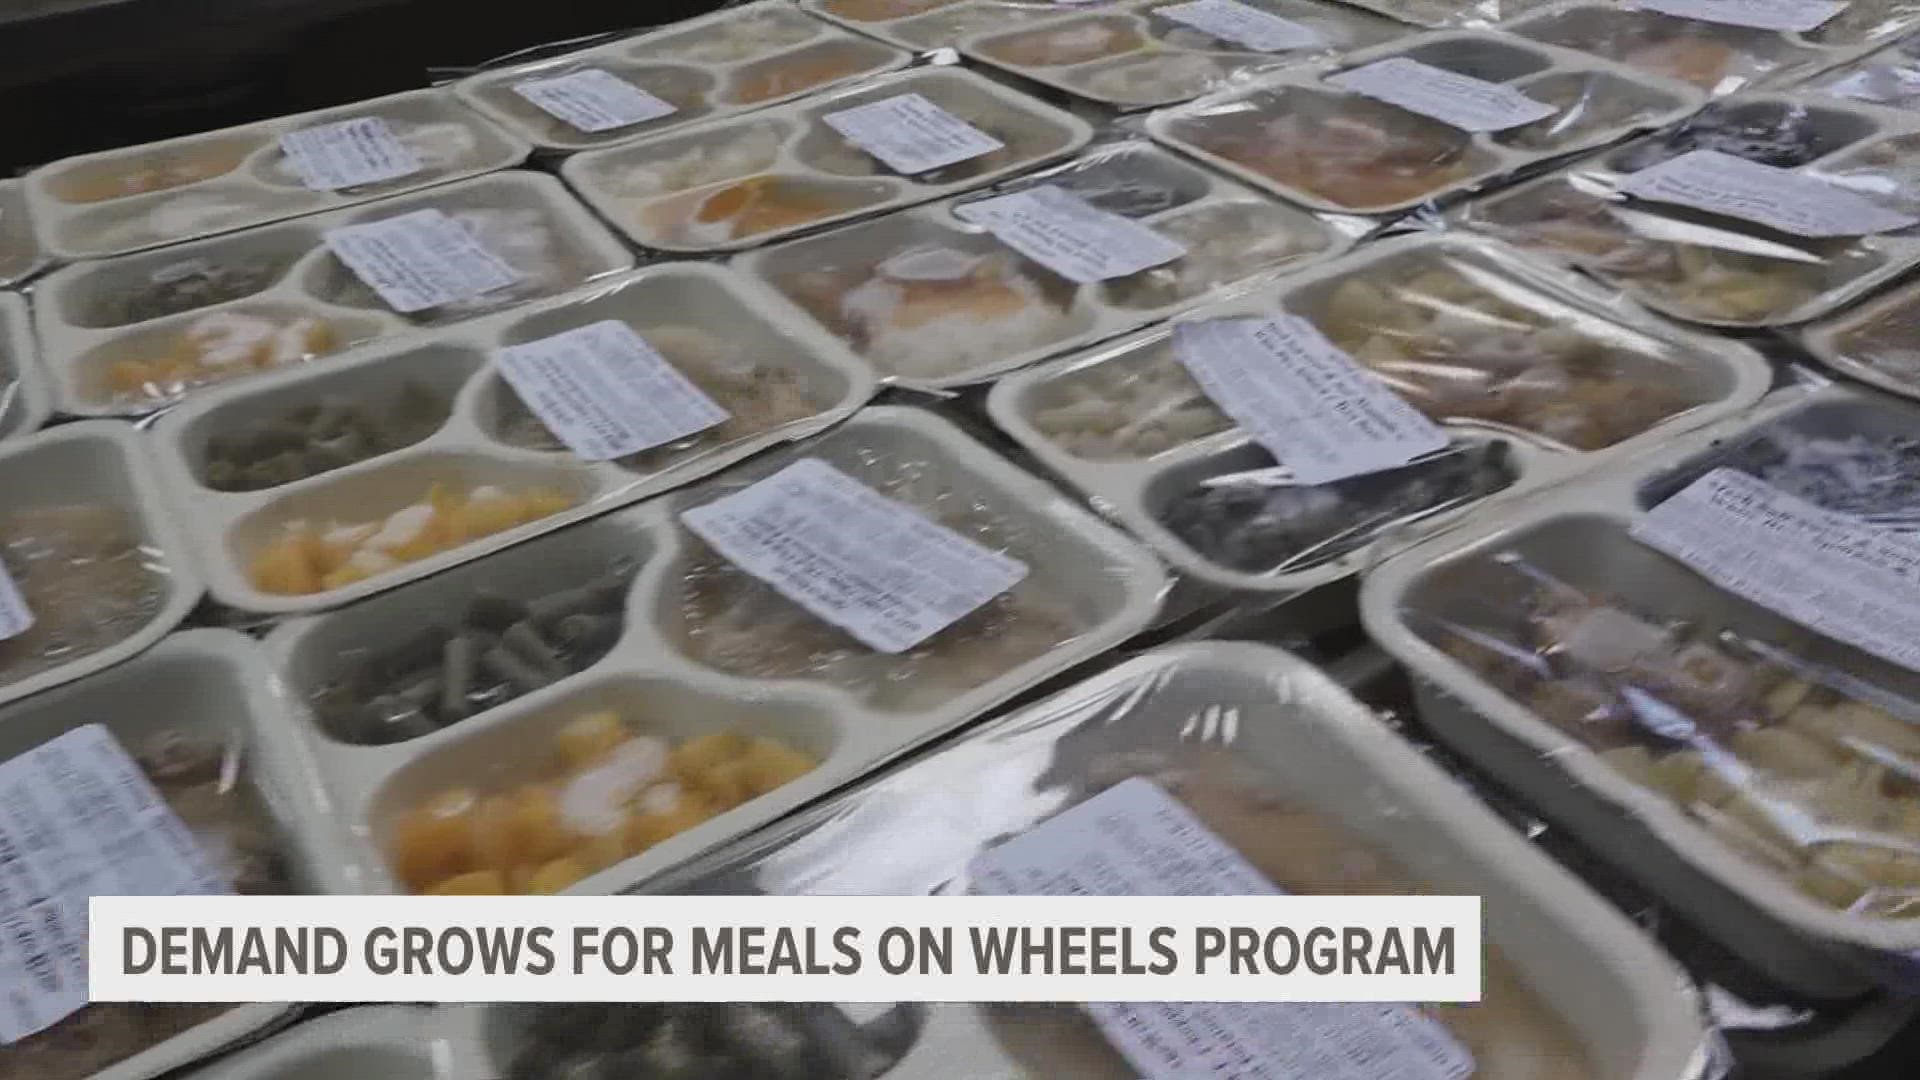 It's the season of giving and a local organization is hoping people will give their time volunteering for Meals on Wheels.